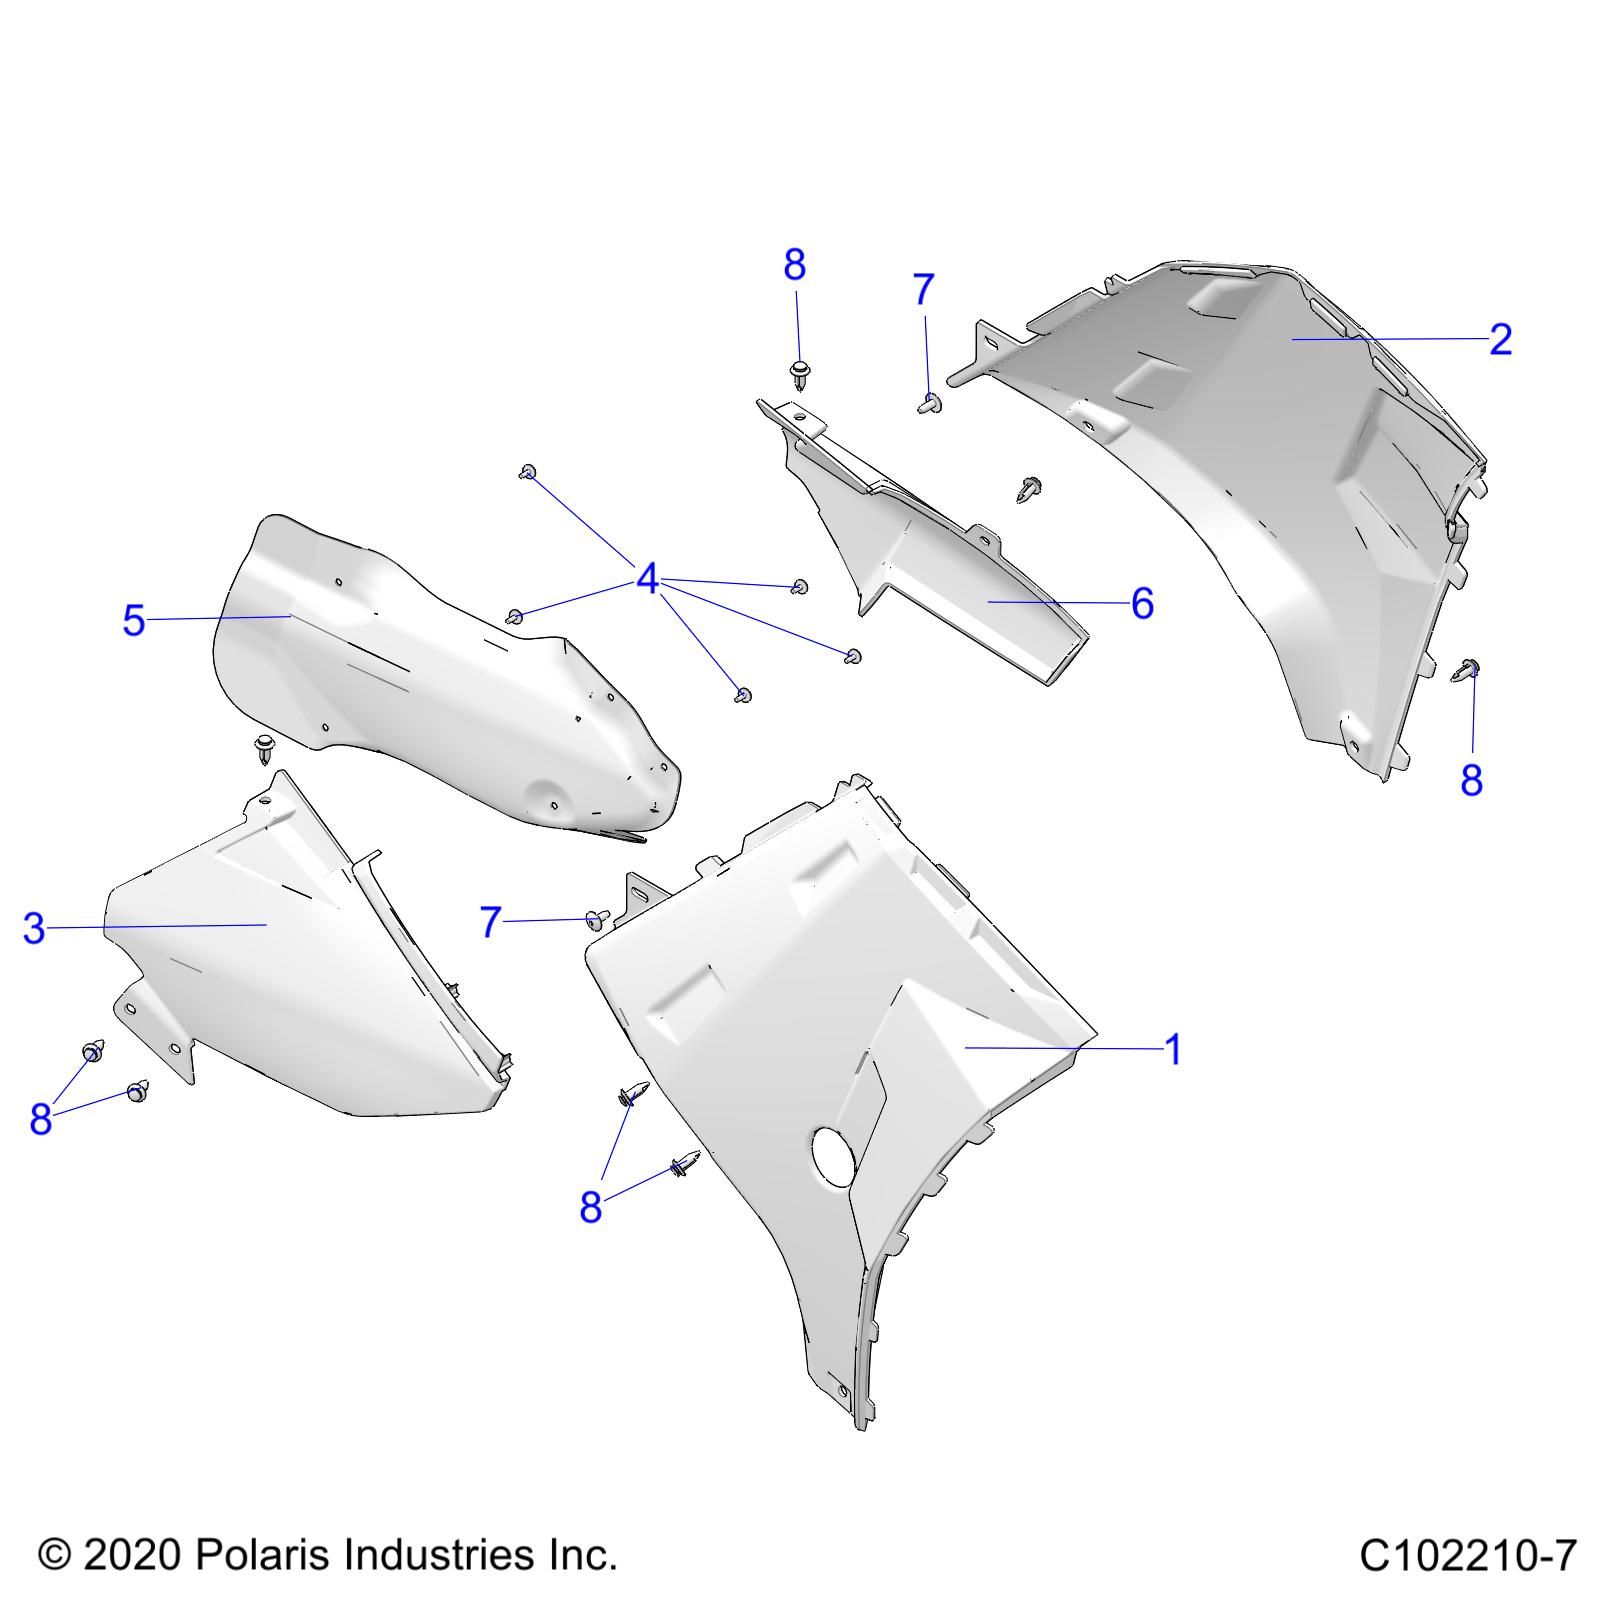 Part Number : 2636354 EXHAUST COVER SHIELD ASSEMBLY